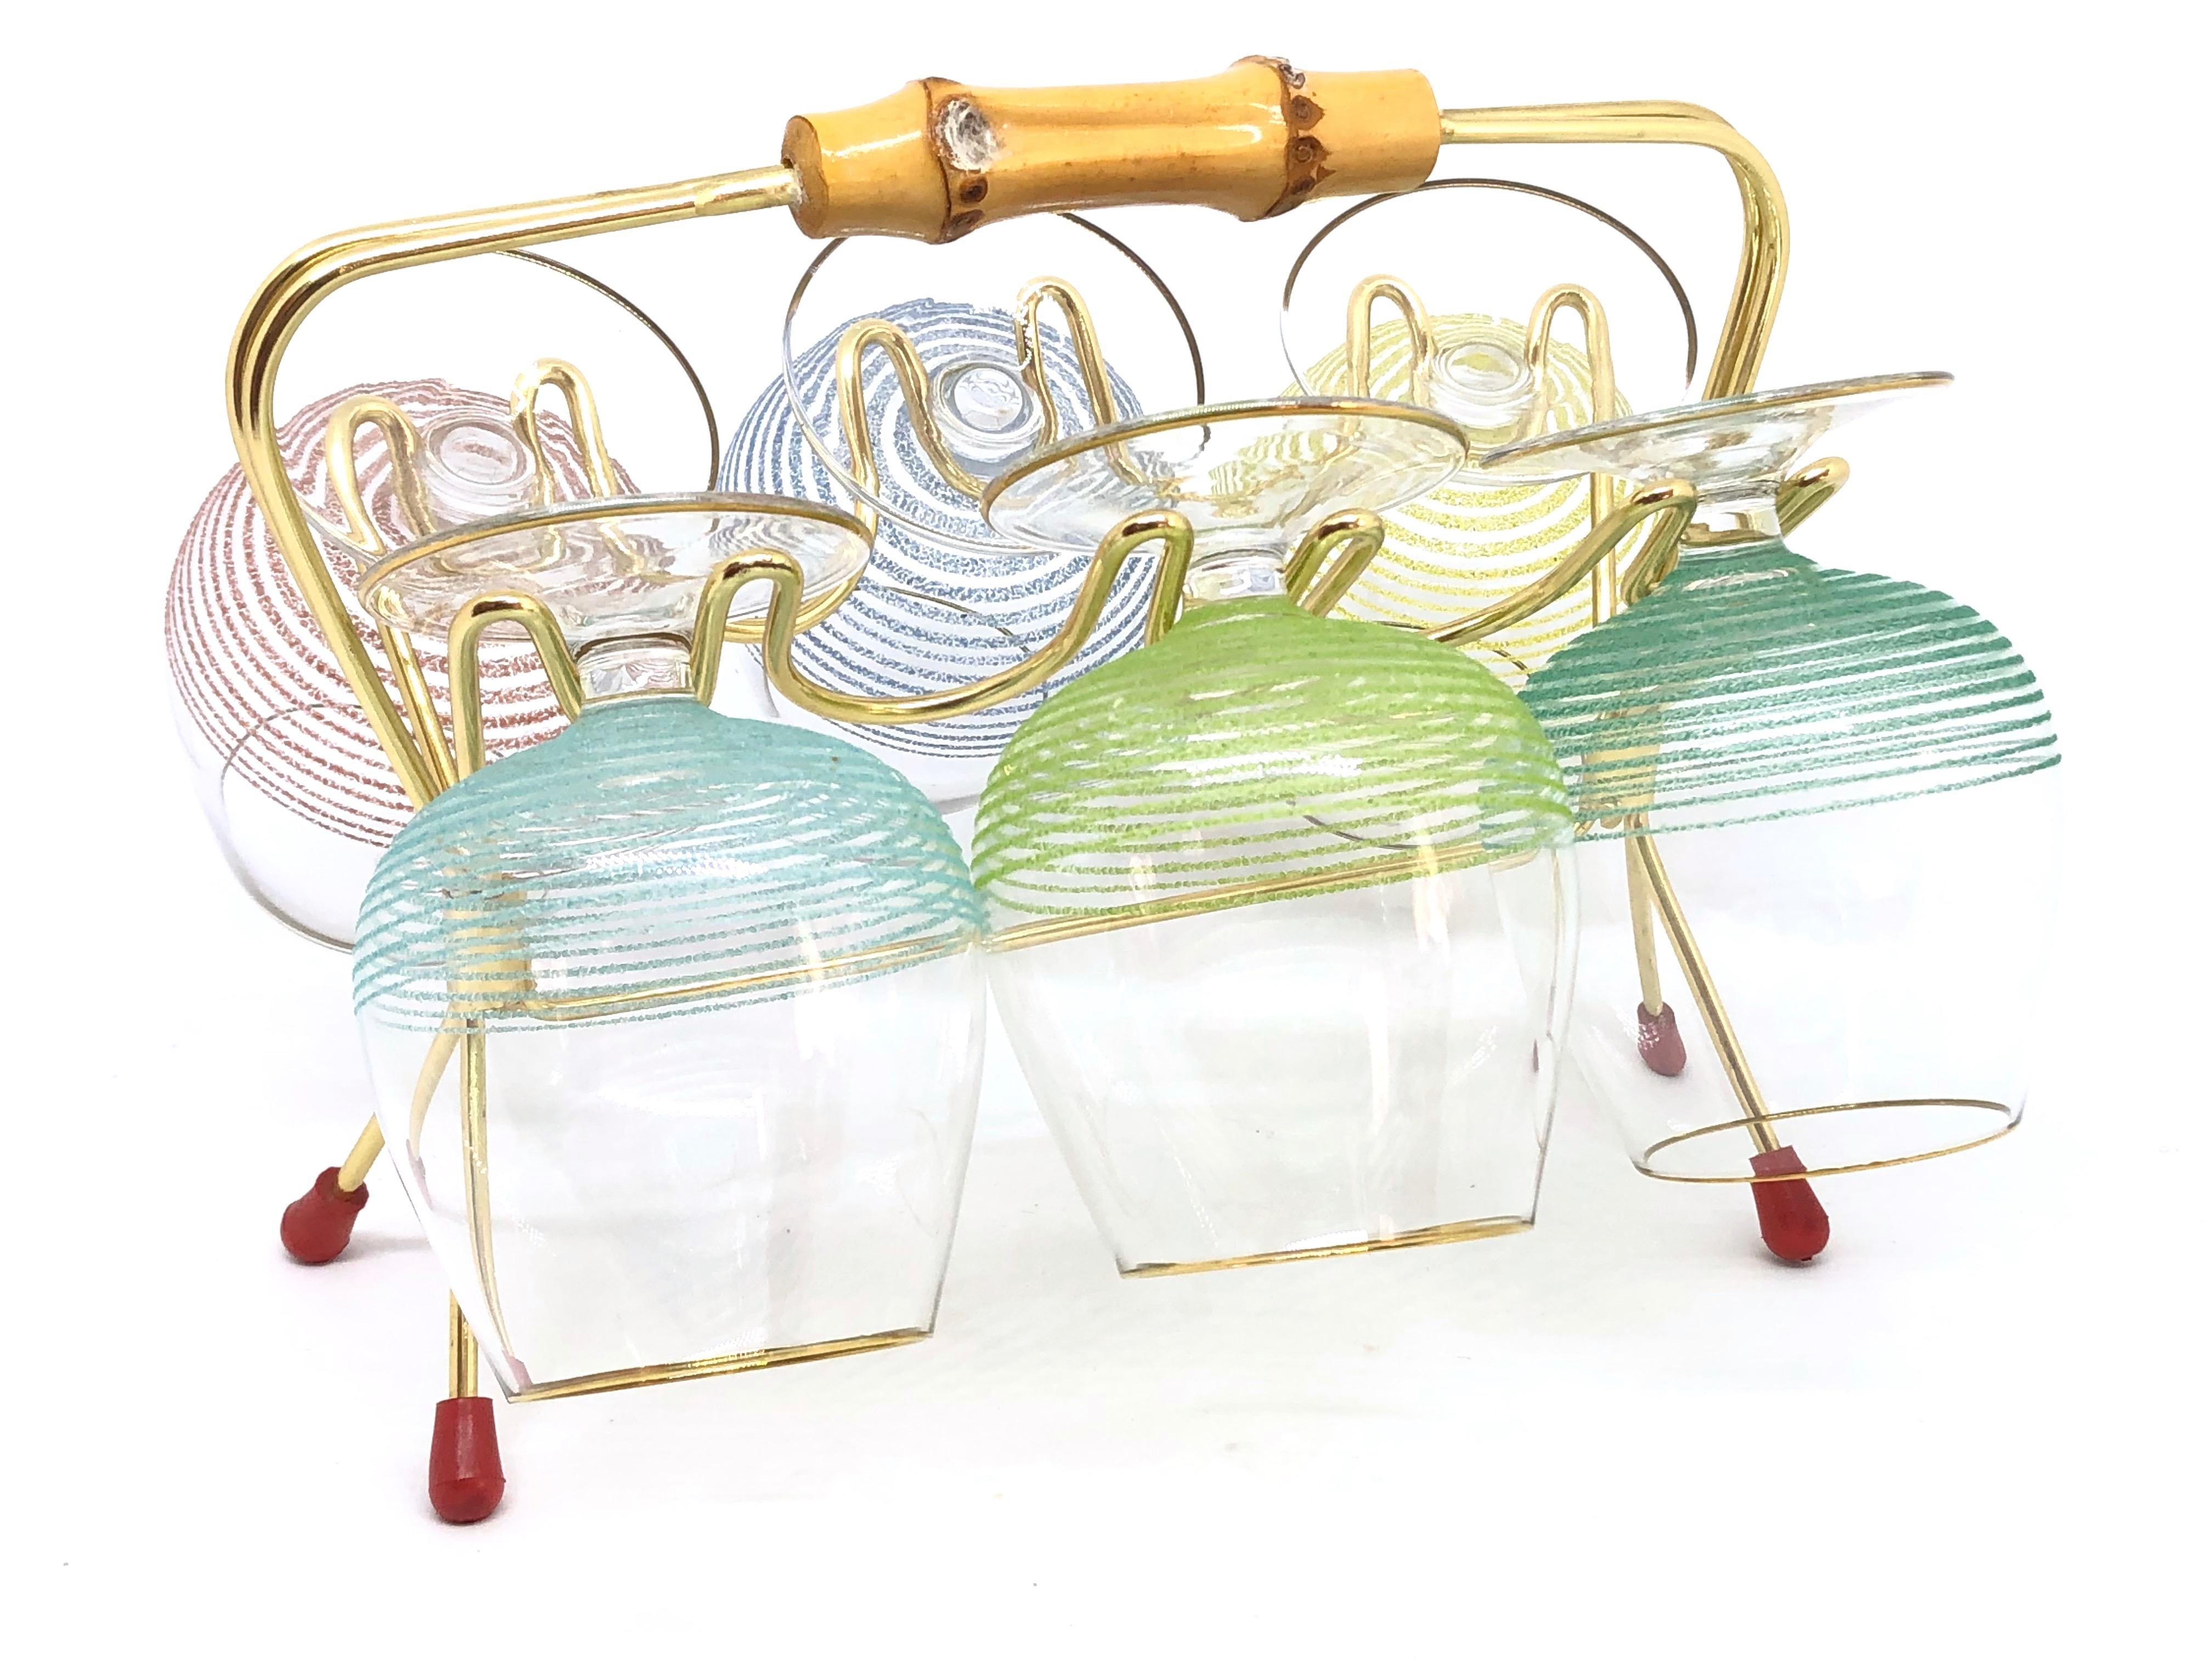 A Mid-Century Modern Barware caddy or display Stand. It holds six cognac snifters glasses. It is made of brass wire, Bamboo handle and mouth blown glasses. Each glass is approx. 3 ½